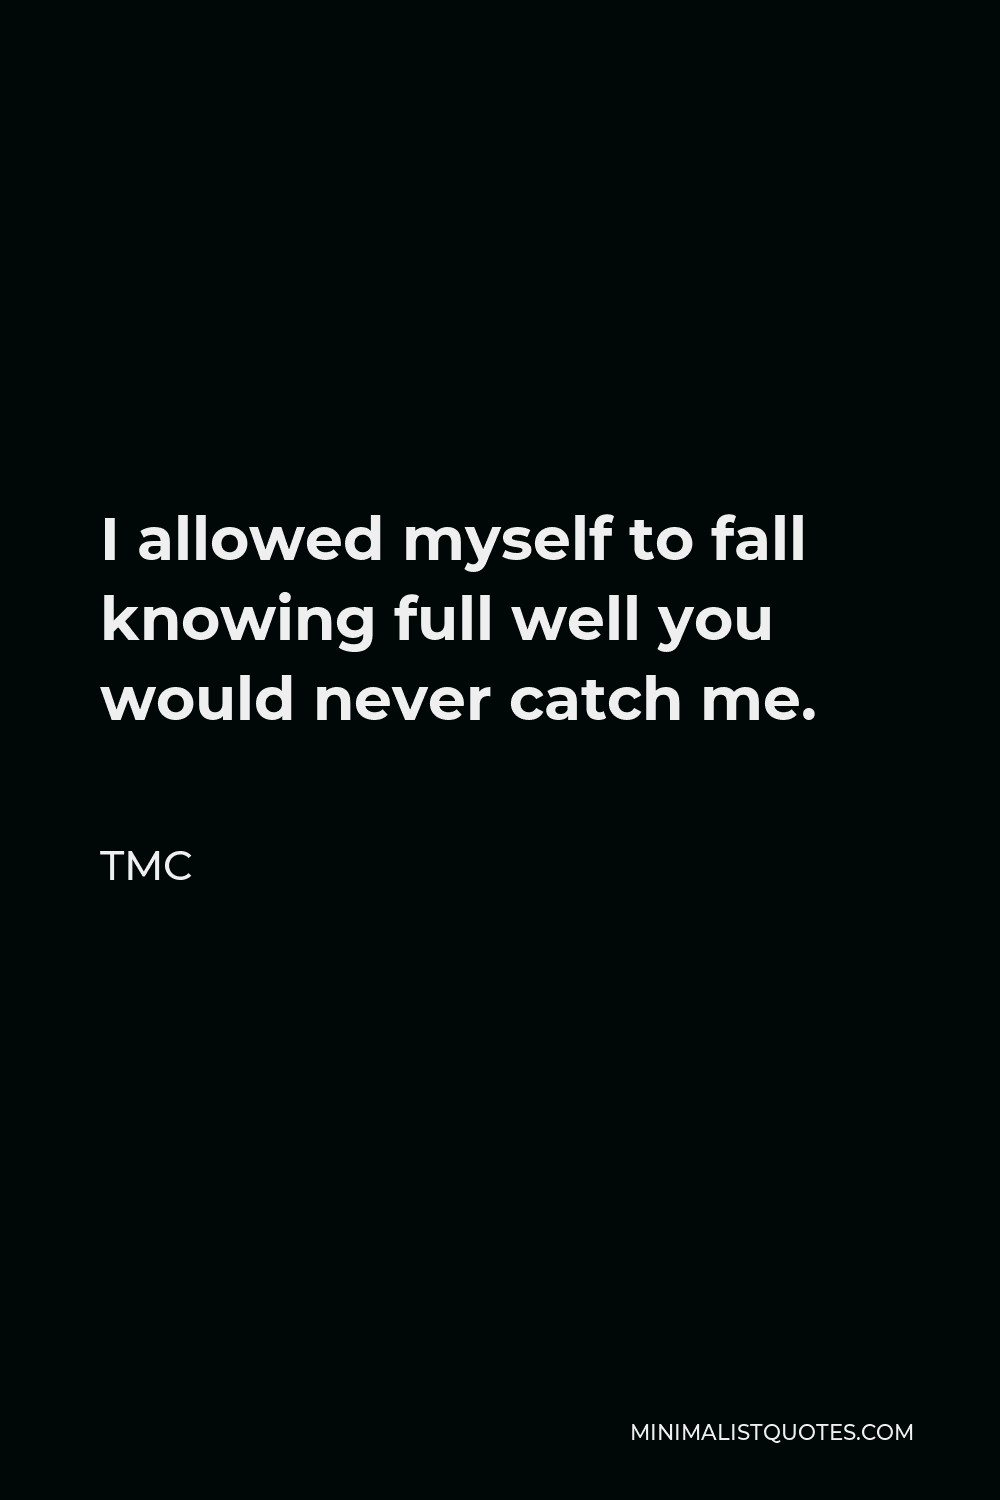 TMC Quote - I allowed myself to fall knowing full well you would never catch me.